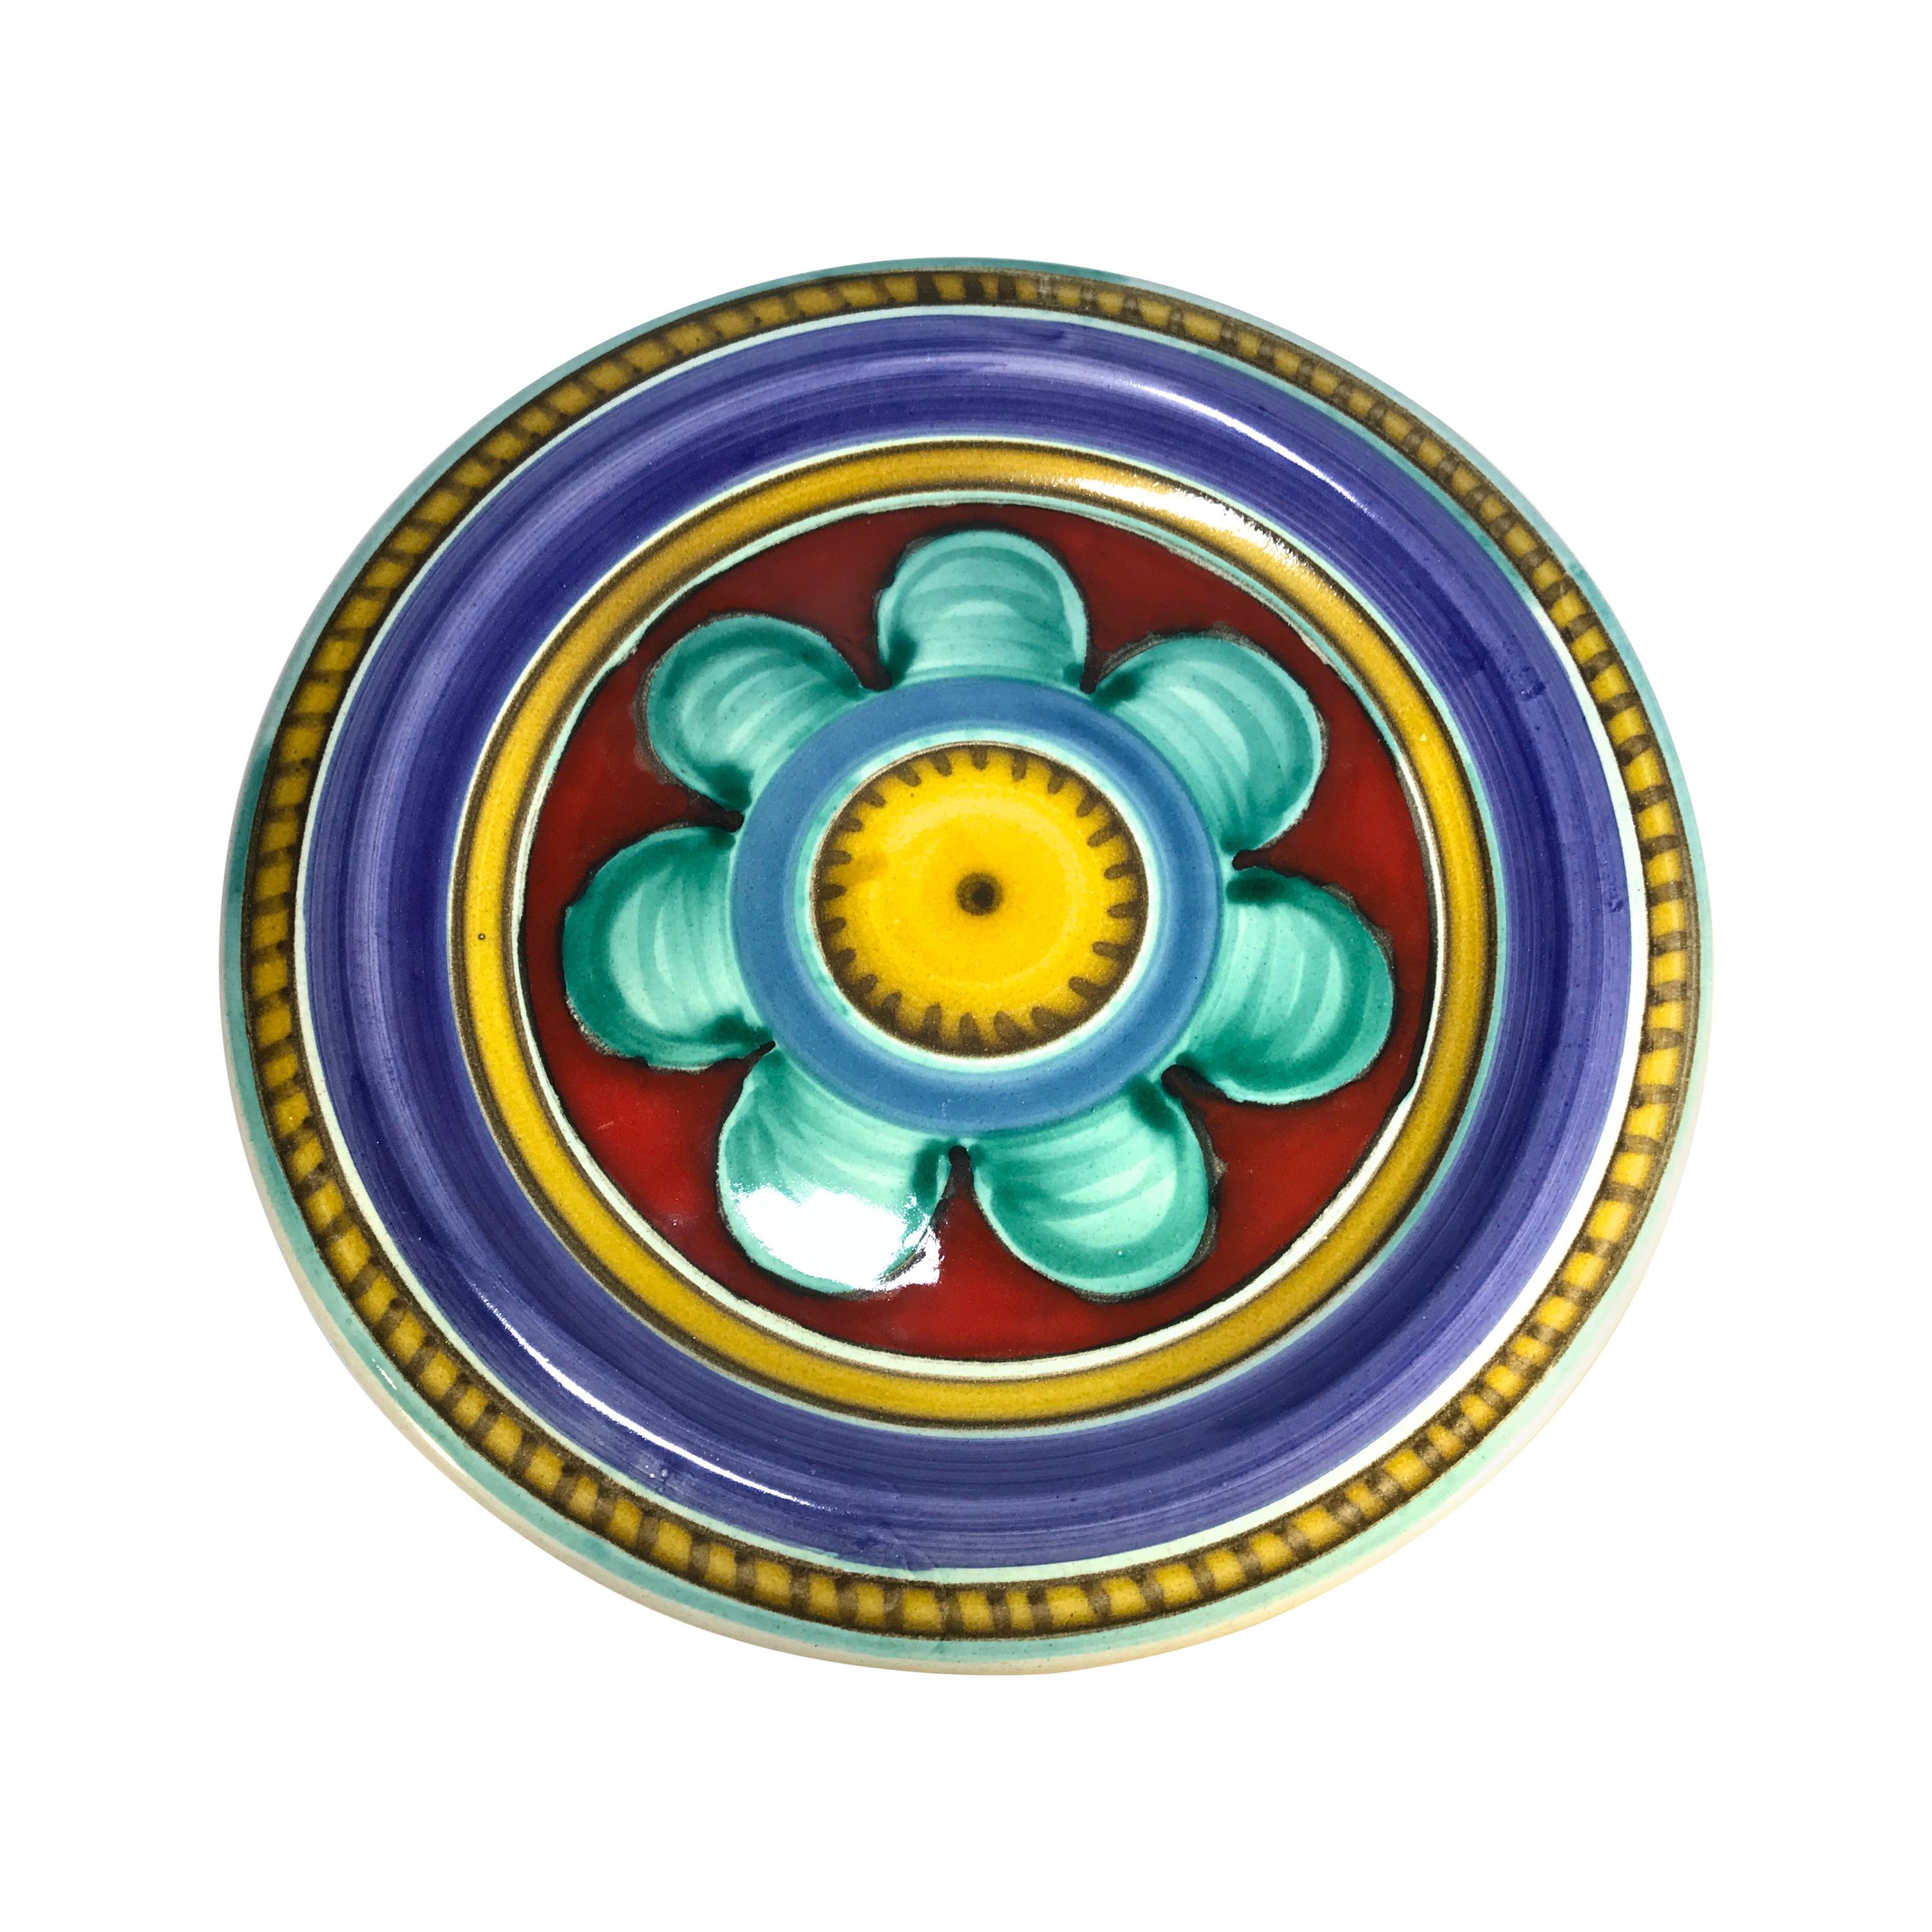 DeSimone of Italy, Hand Painted Colourful Ceramic Plate, 1960s